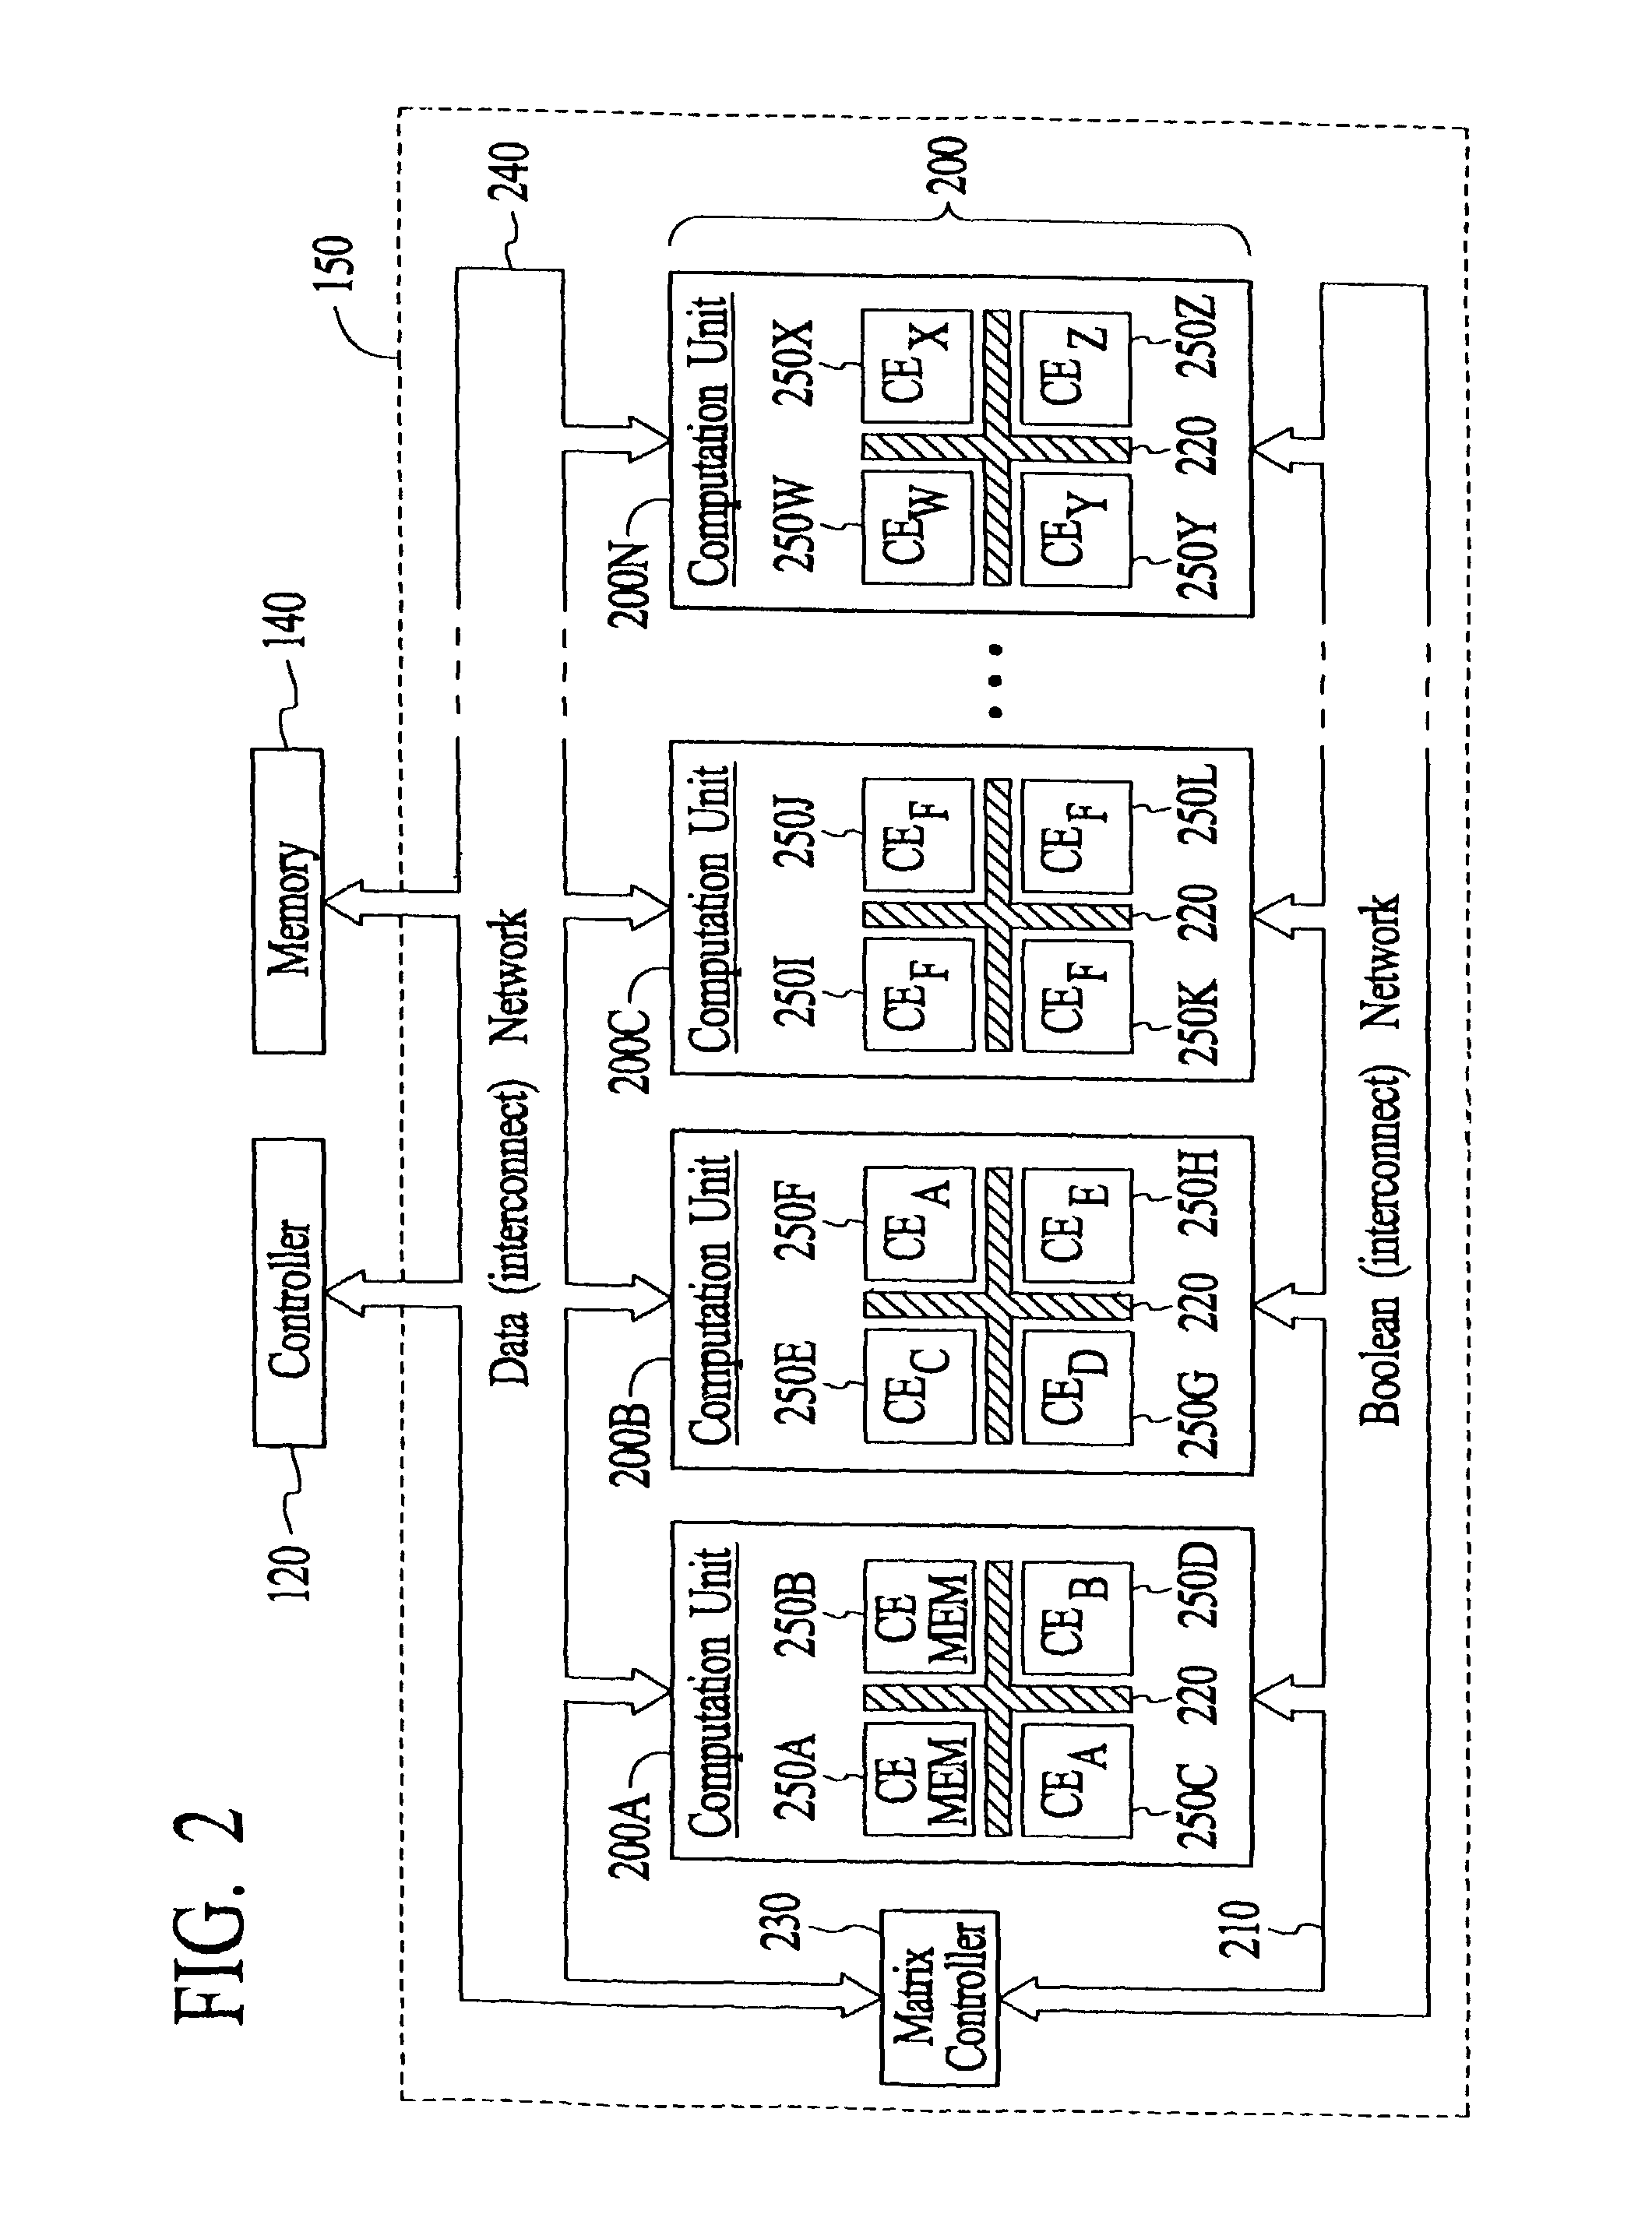 Method and system for providing a device which can be adapted on an ongoing basis